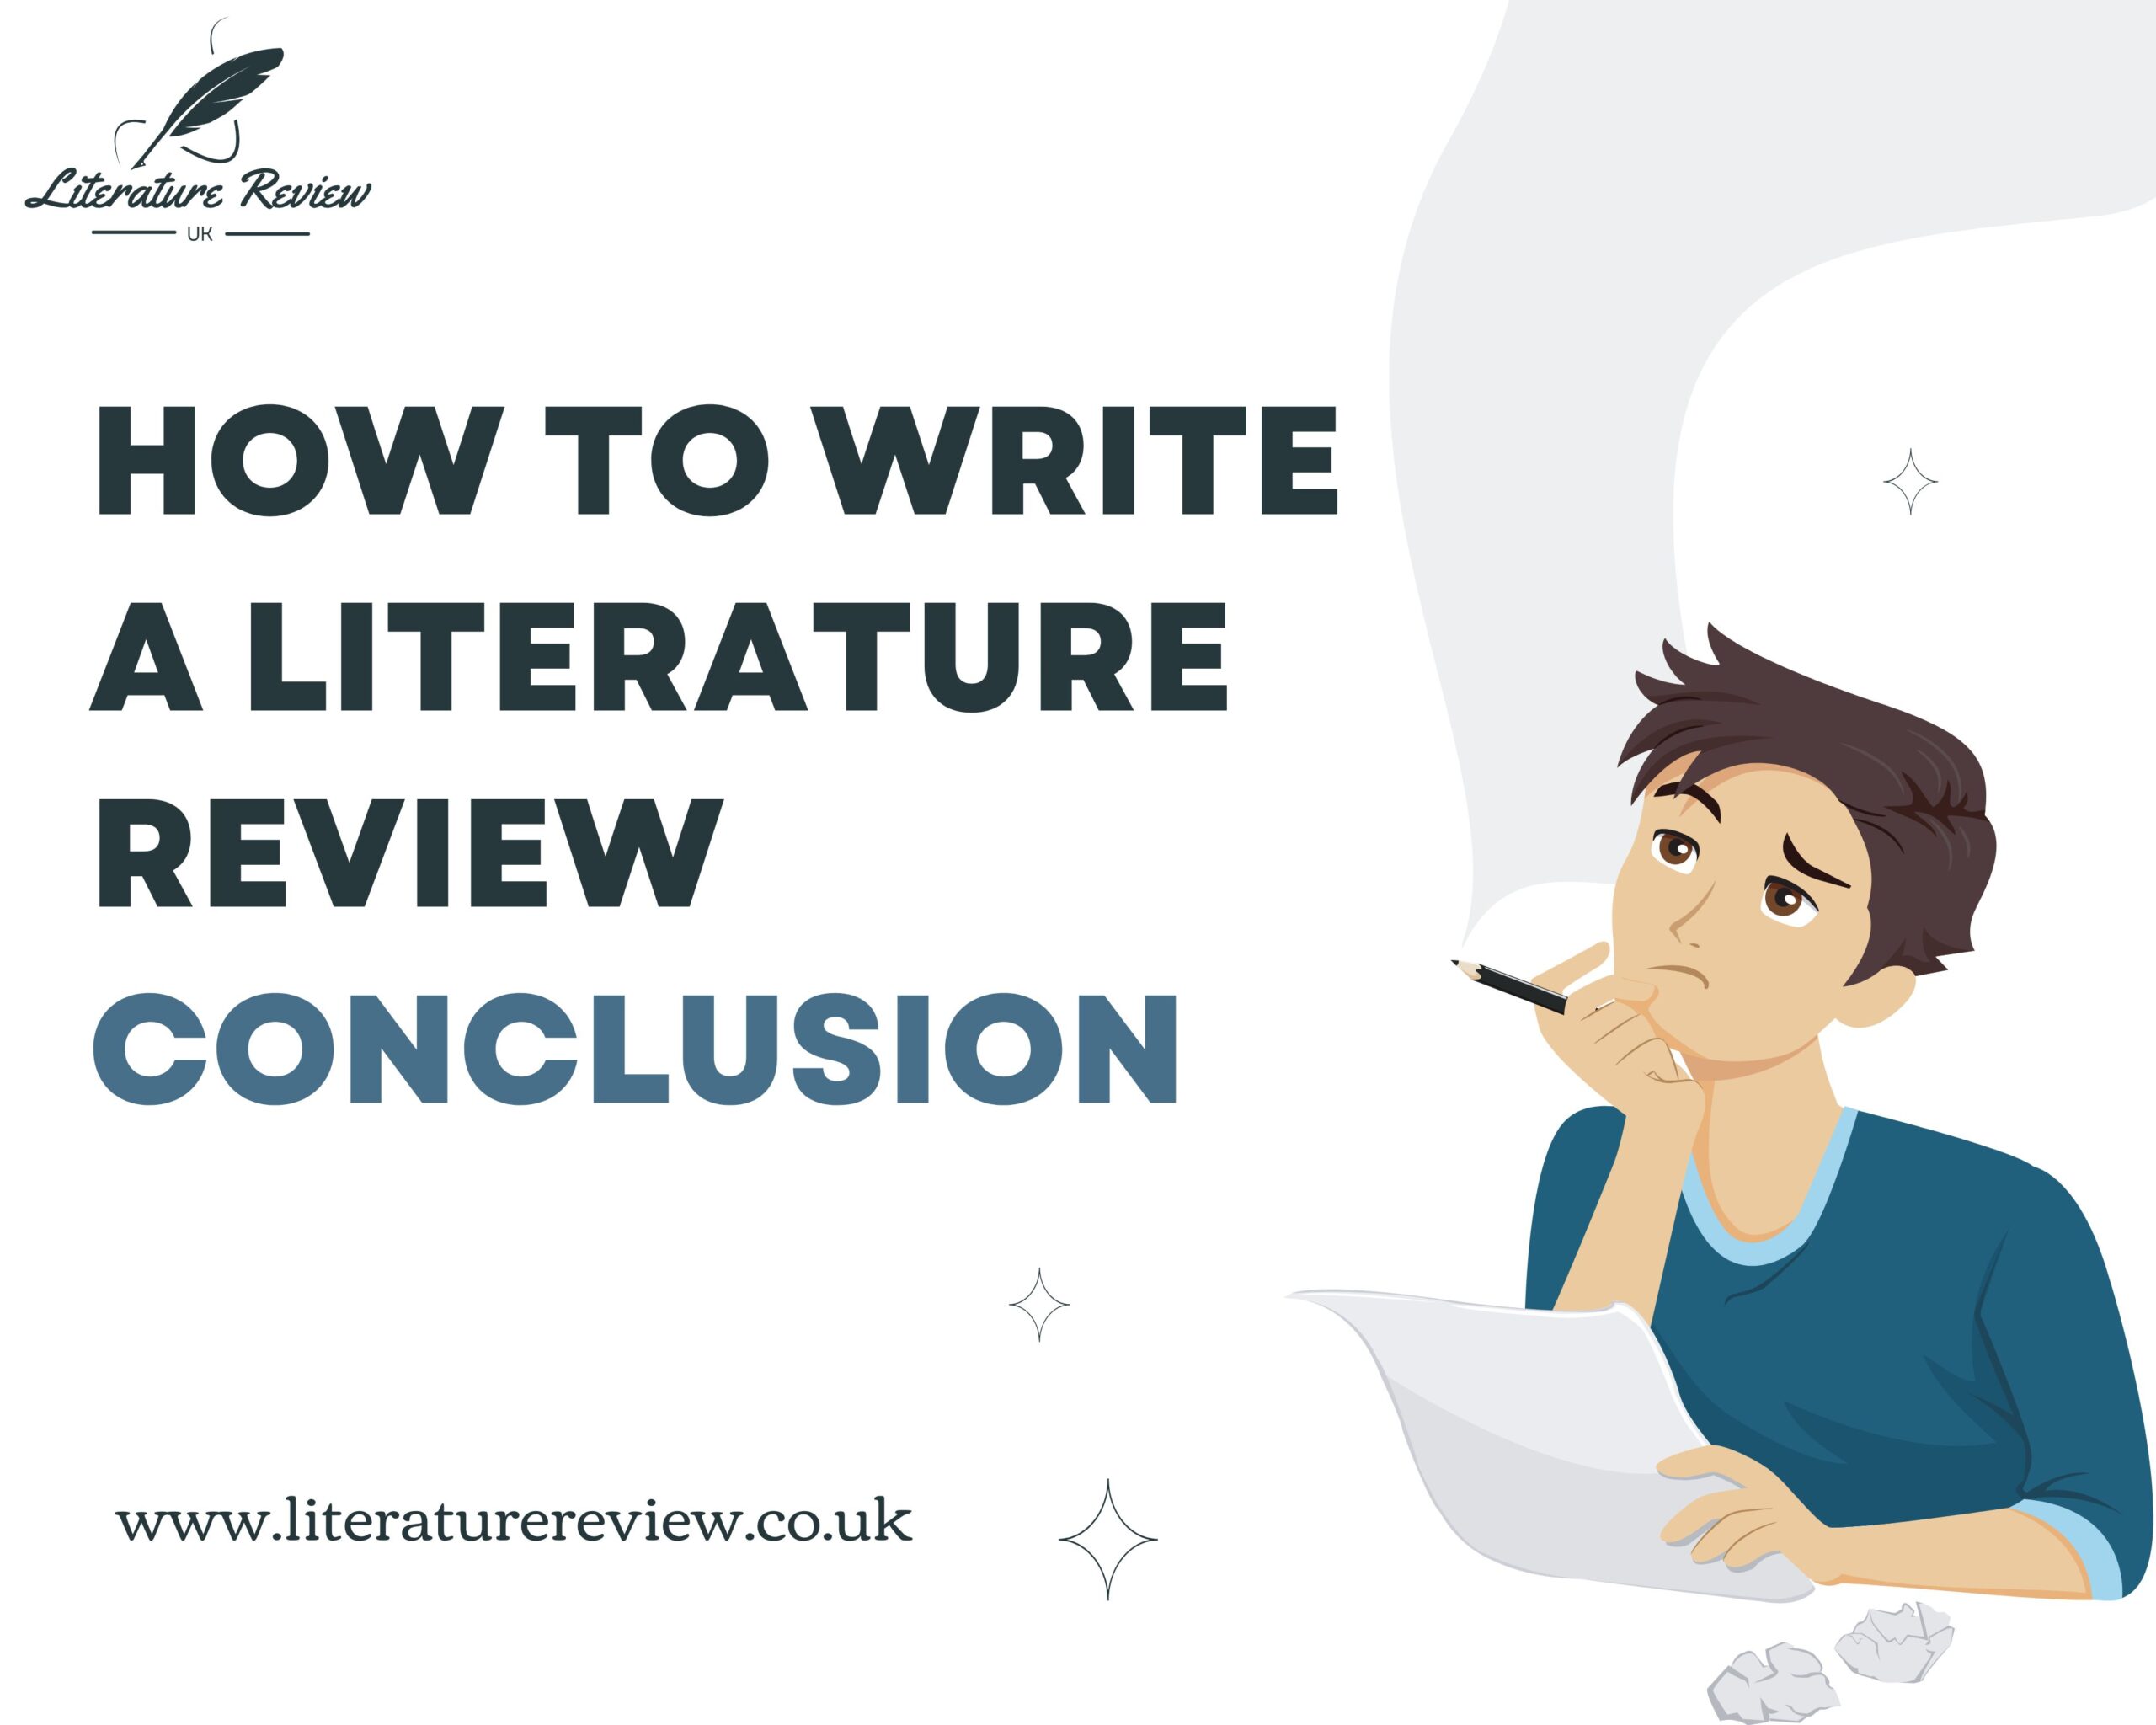 How to Write a Literature Review Conclusion